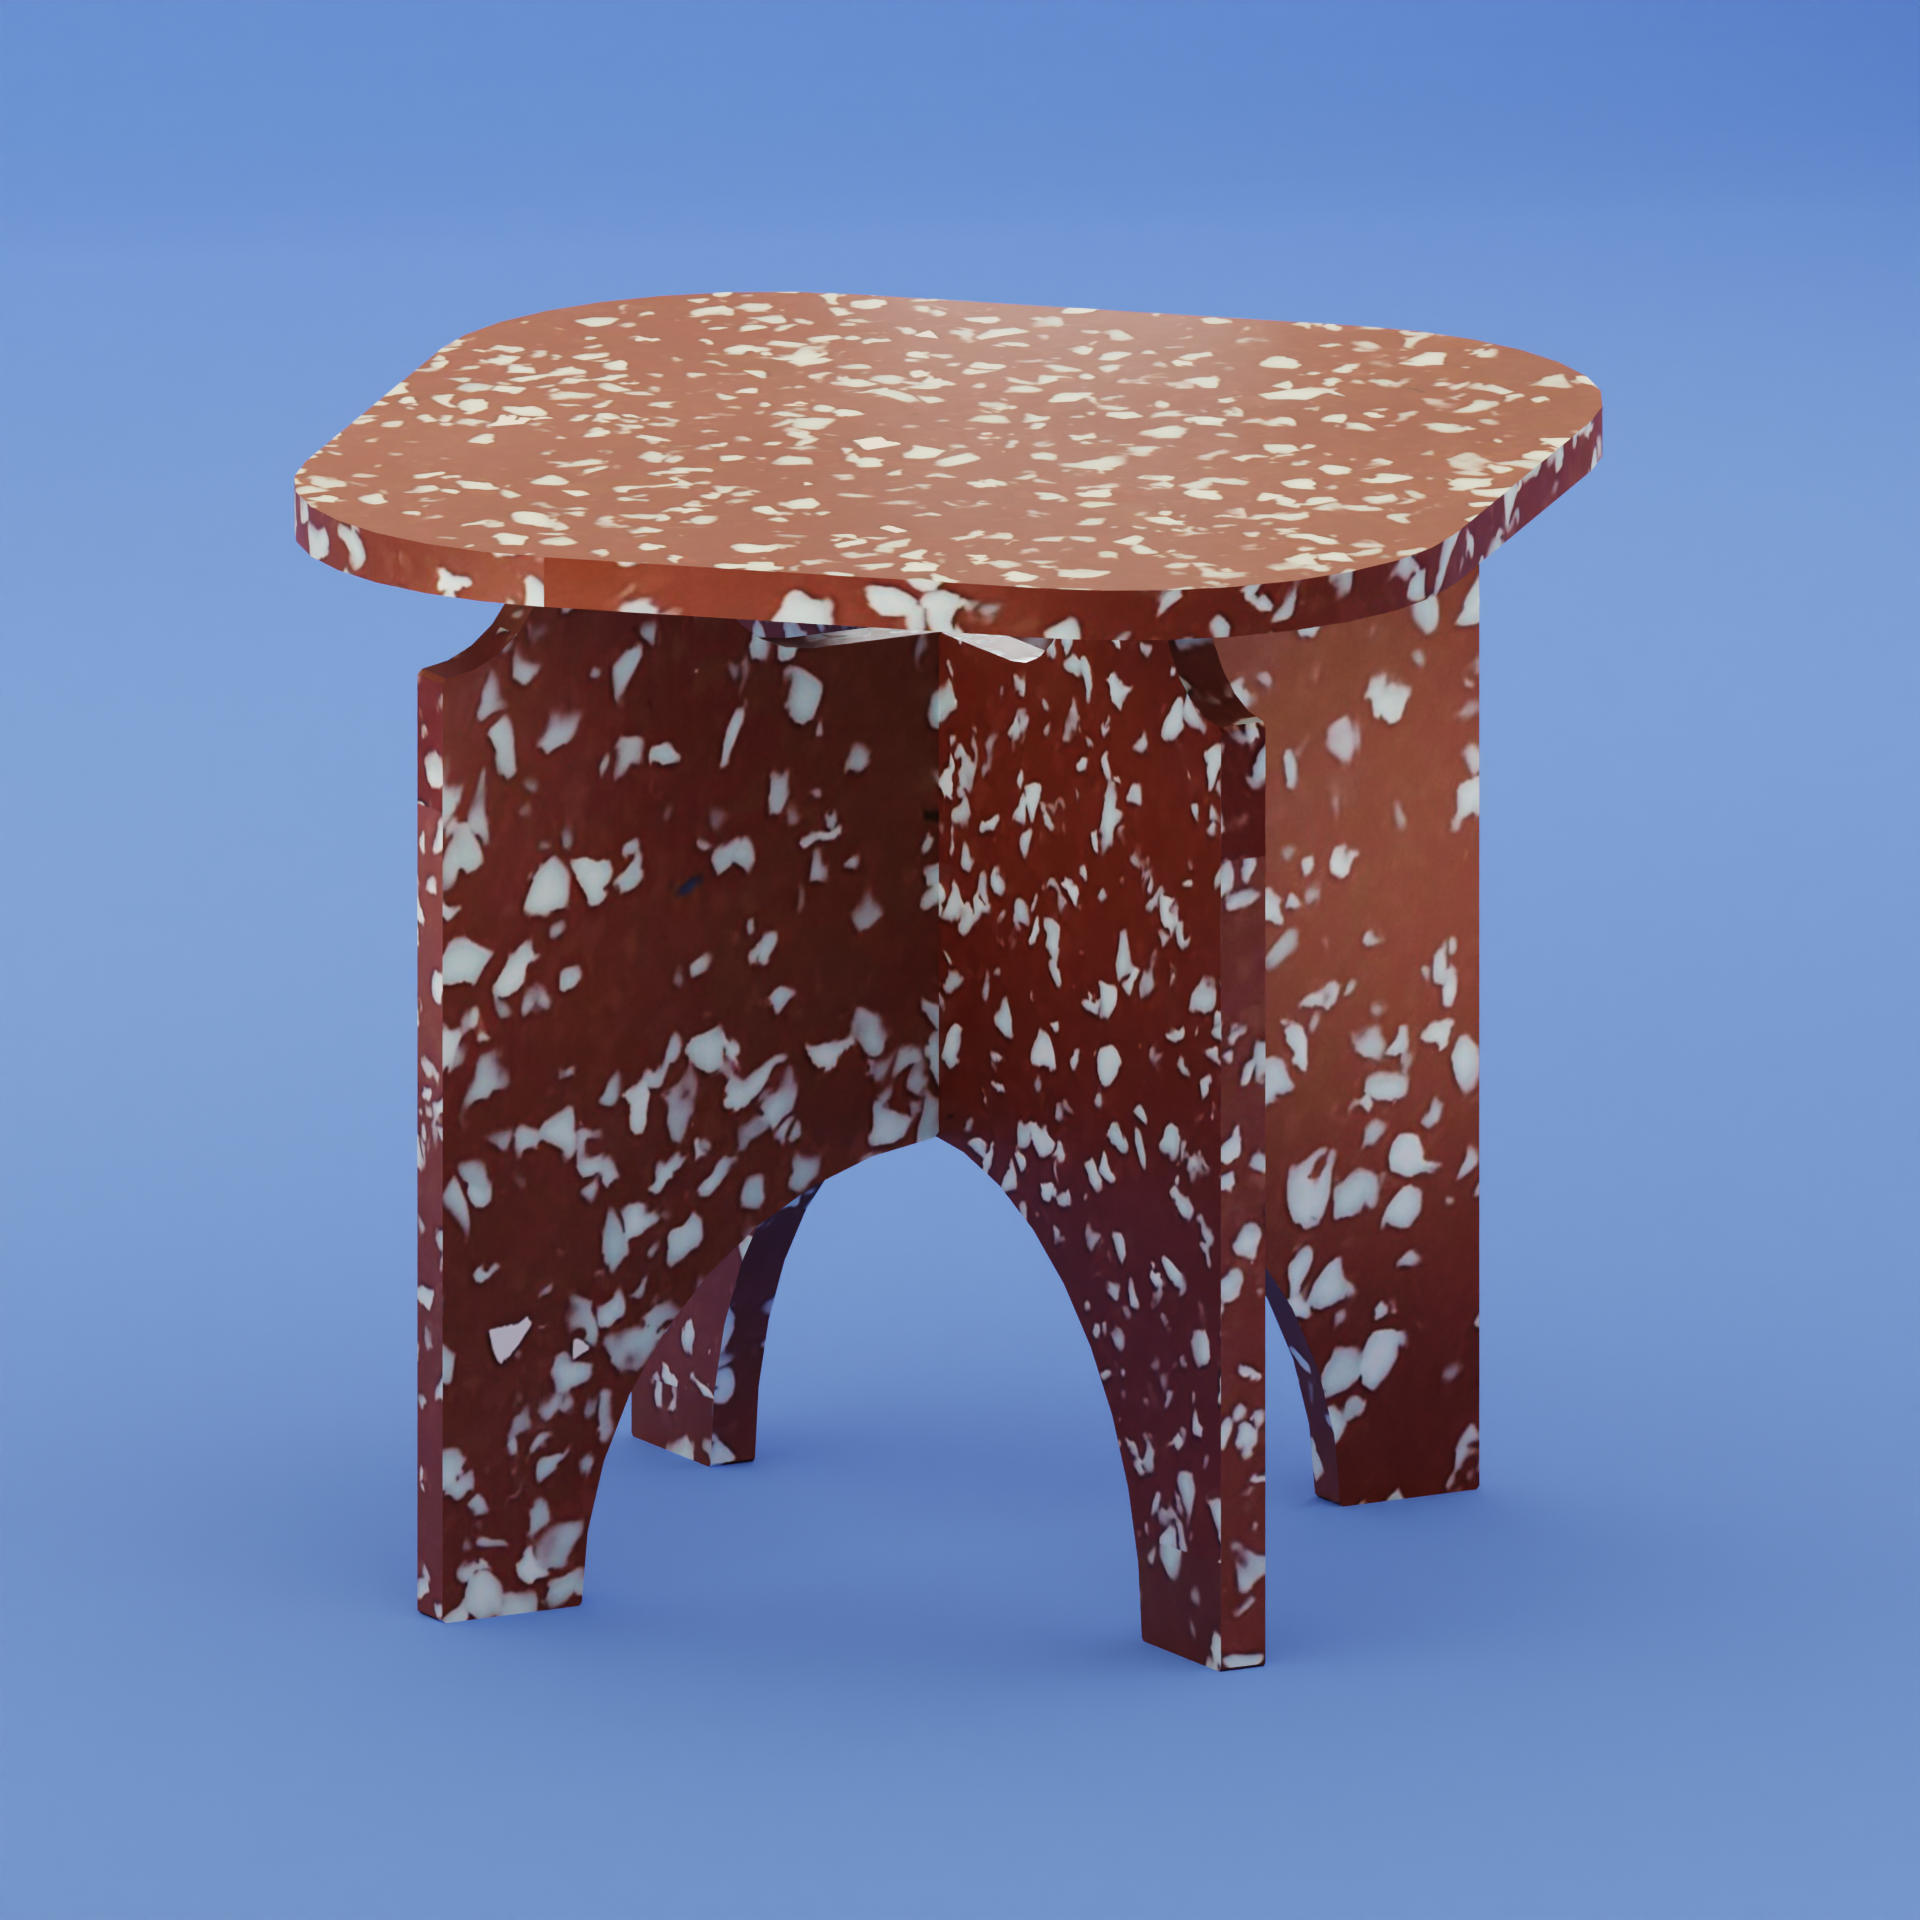 SQUARE TOP RED STOOL BY THE MINIMONO PROJECT - BRAND FOR ECO FRIENDLY - PLAYFUL - MULTI FUNCTIONAL - SUSTAINABLE - HIGH QUALITY - DESIGN FURNITURE FROM RECYCLED PLASTIC FOR BOTH ADULT AND CHILDREN MADE IN BERLIN GERMANY